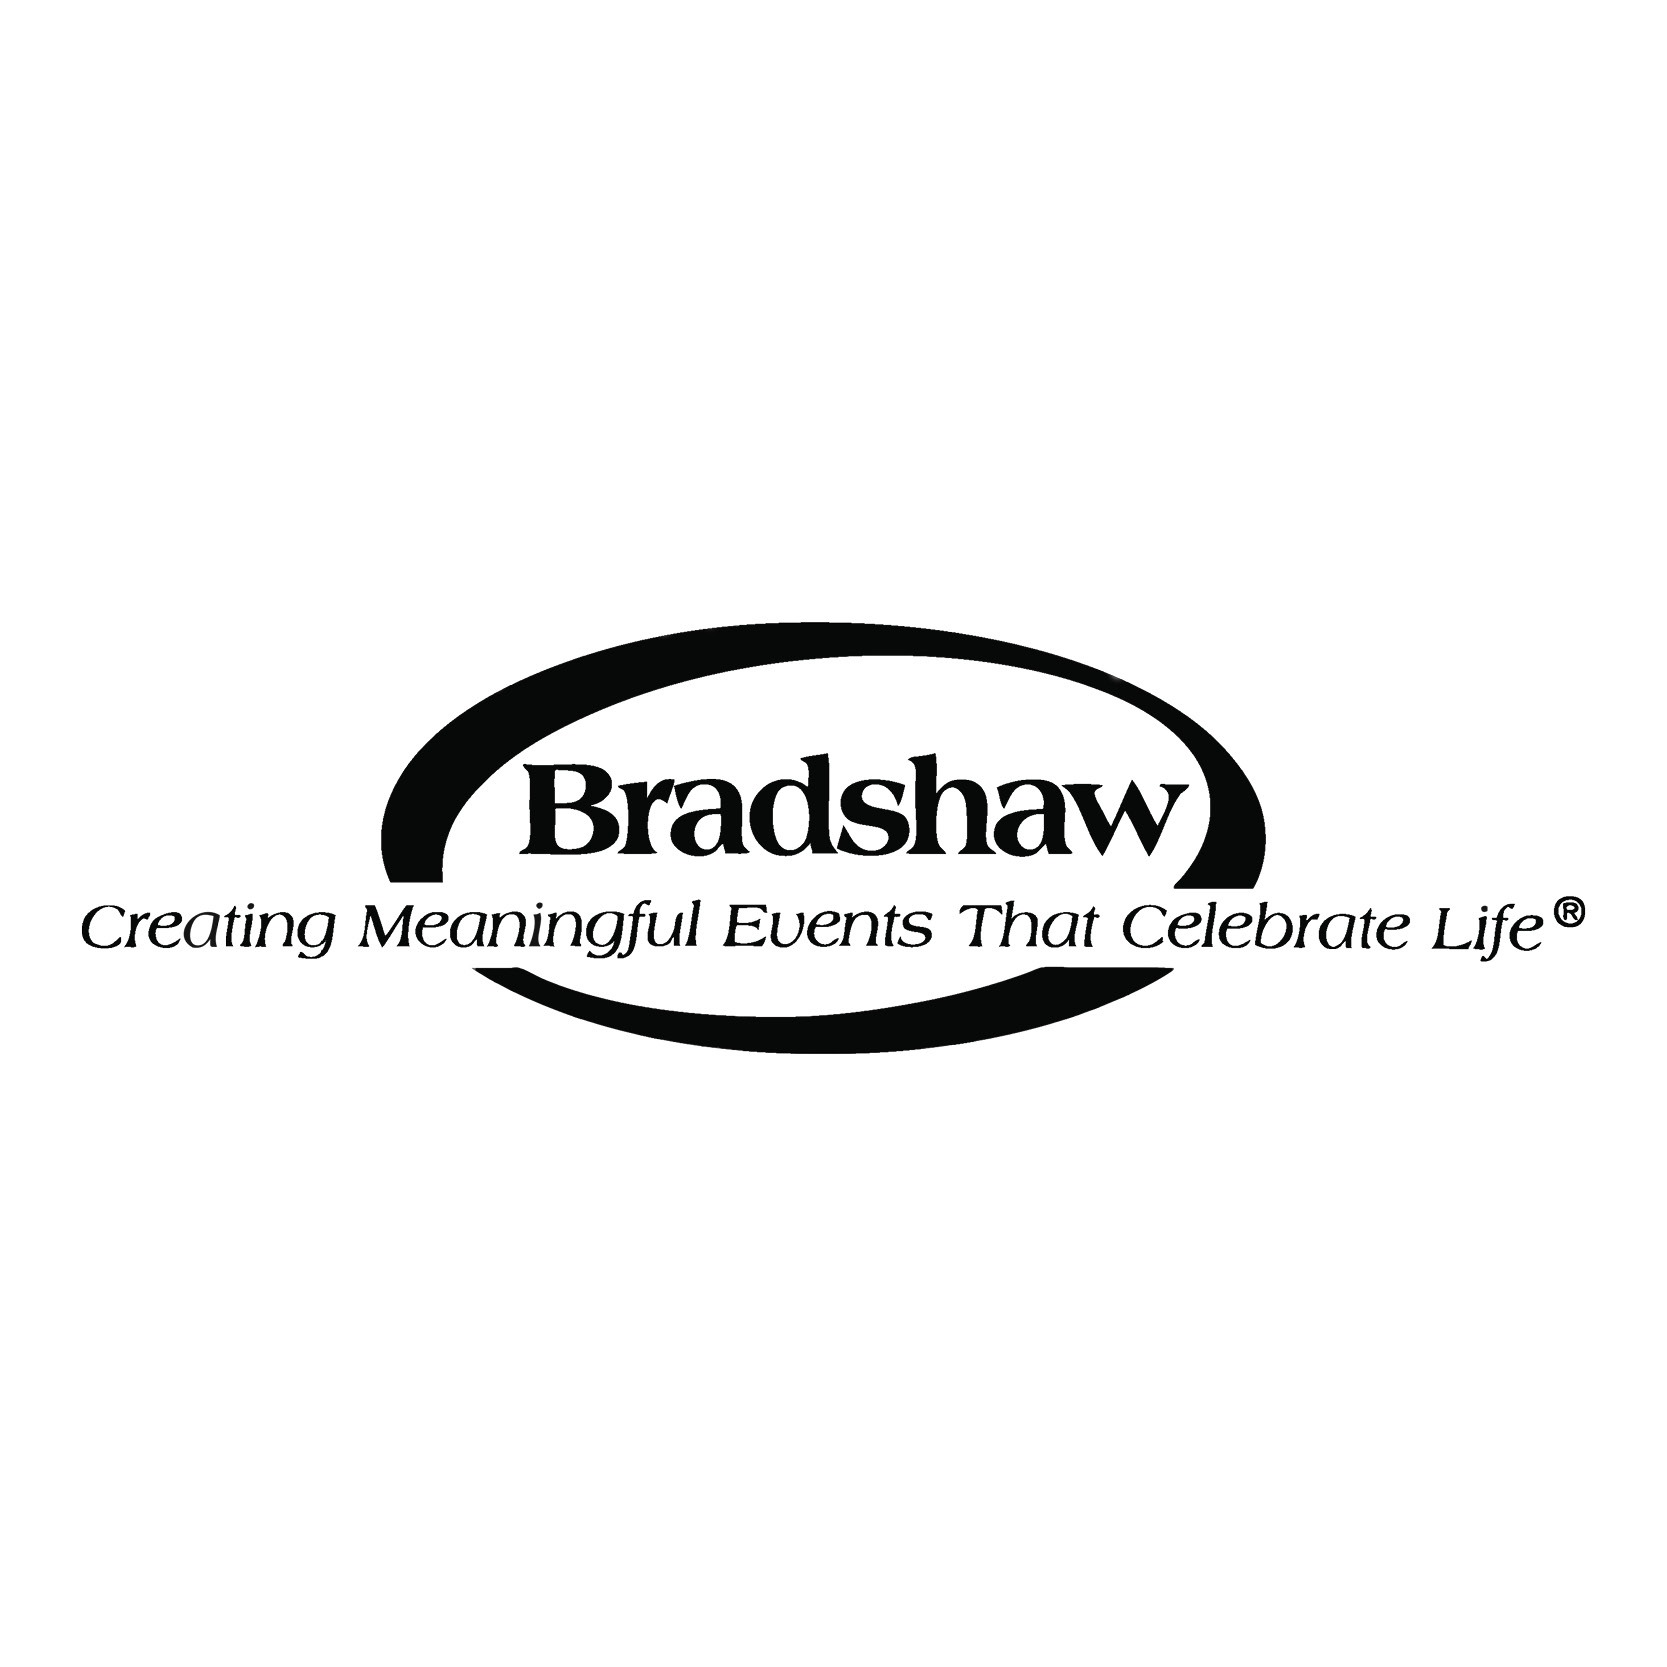 Bradshaw Funeral & Cremation Services & Celebration of Life - St Paul, MN 55117 - (651)489-1349 | ShowMeLocal.com